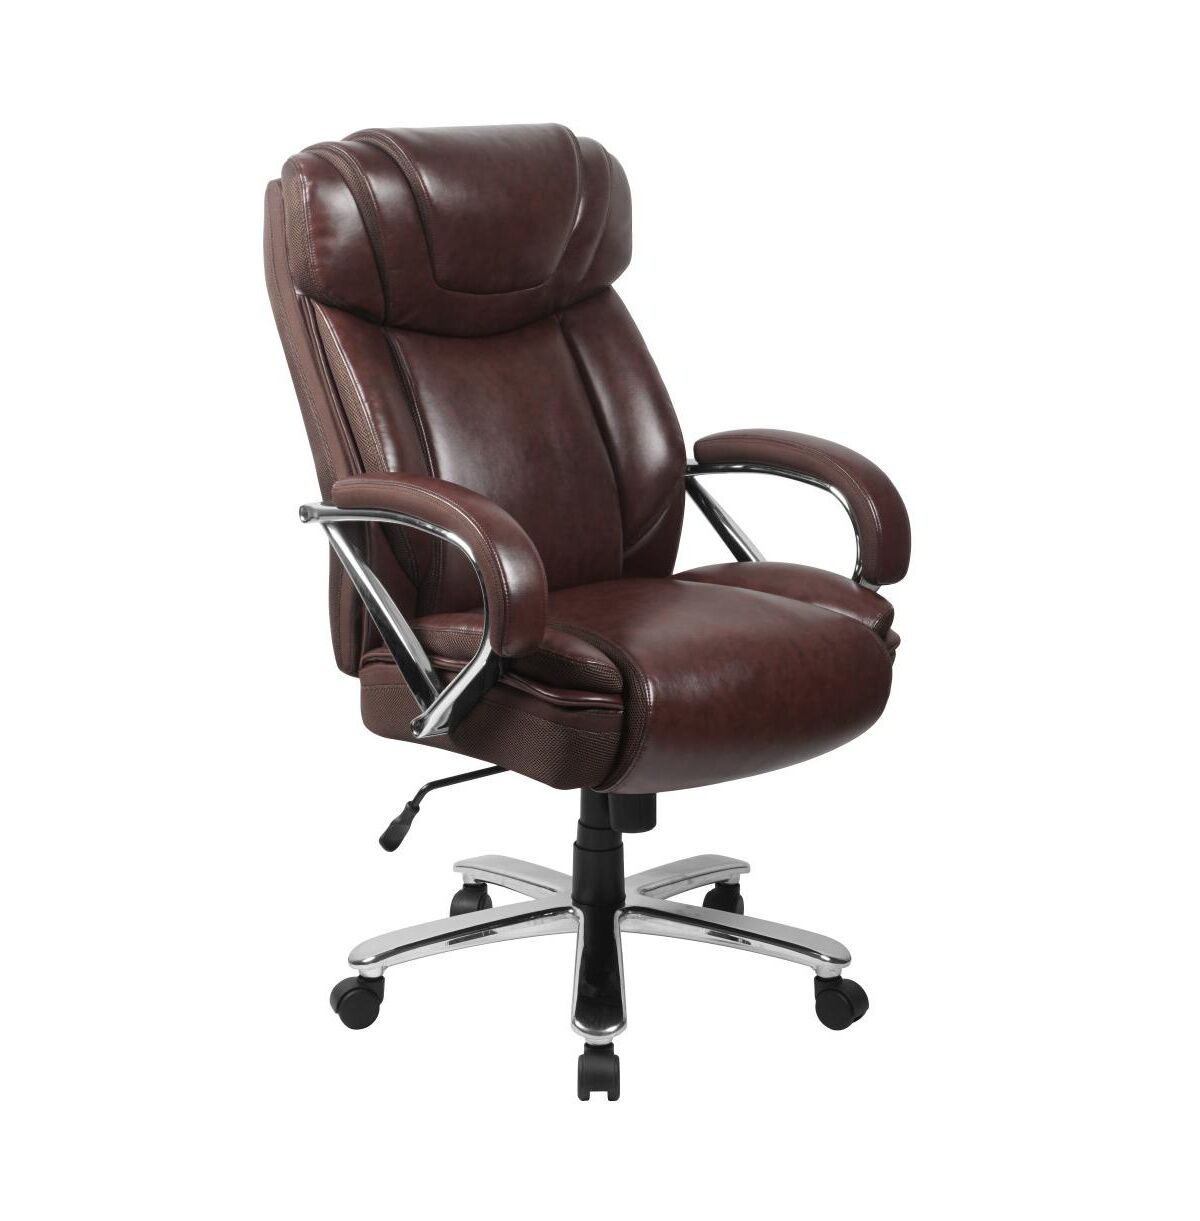 Emma+oliver 500 Lb. Big & Tall Leathersoft Executive Ergonomic Office Chair With Wide Seat - Brown